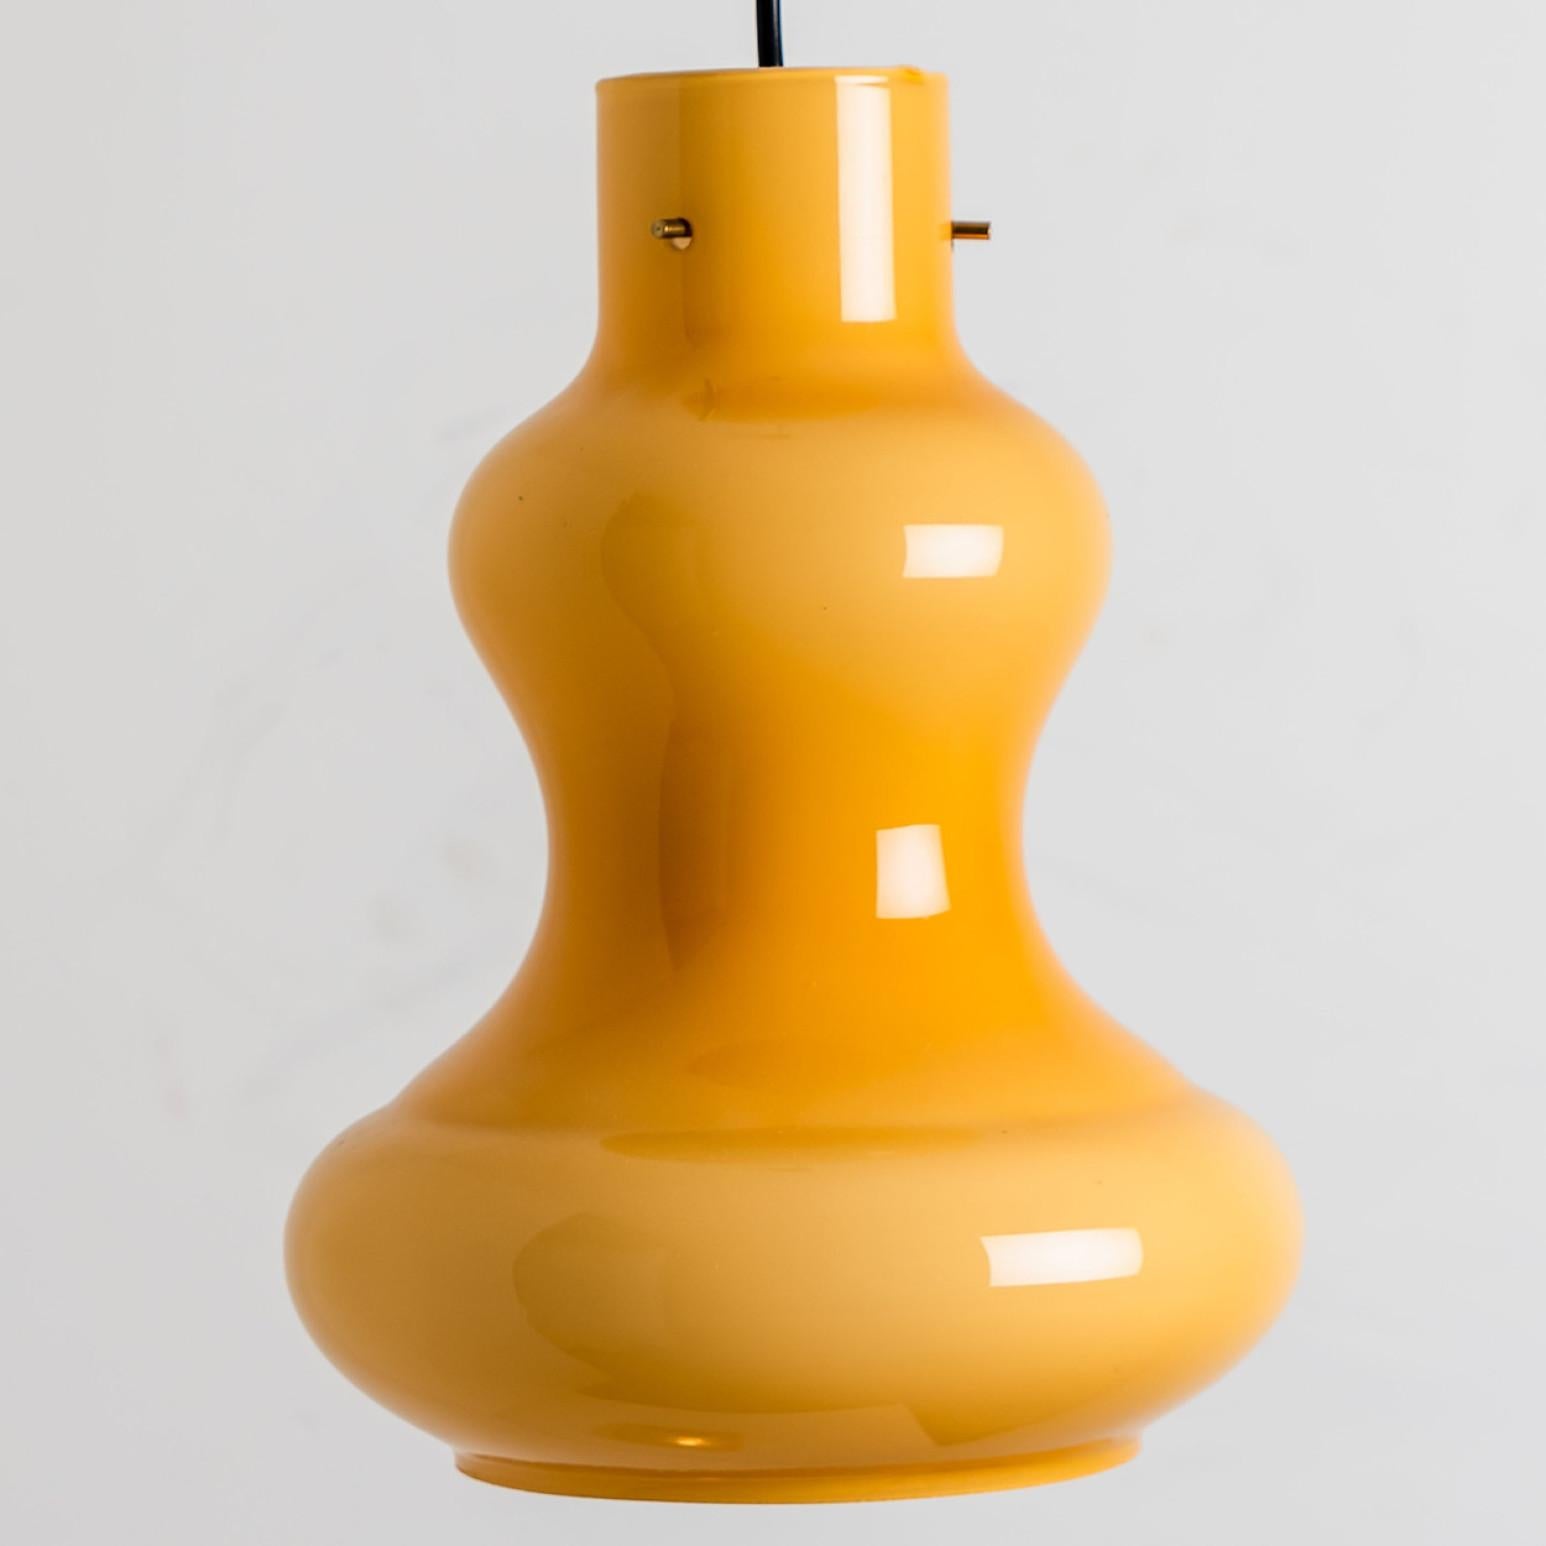 A beautiful yellow glass pendant light, made in the 1960s by Massimo Vignelli for Venini.
The lampshade is made of yellow opaline glass with an inner white glaze. Real murano glass, made in Italy.

We have two other colors available, which will make